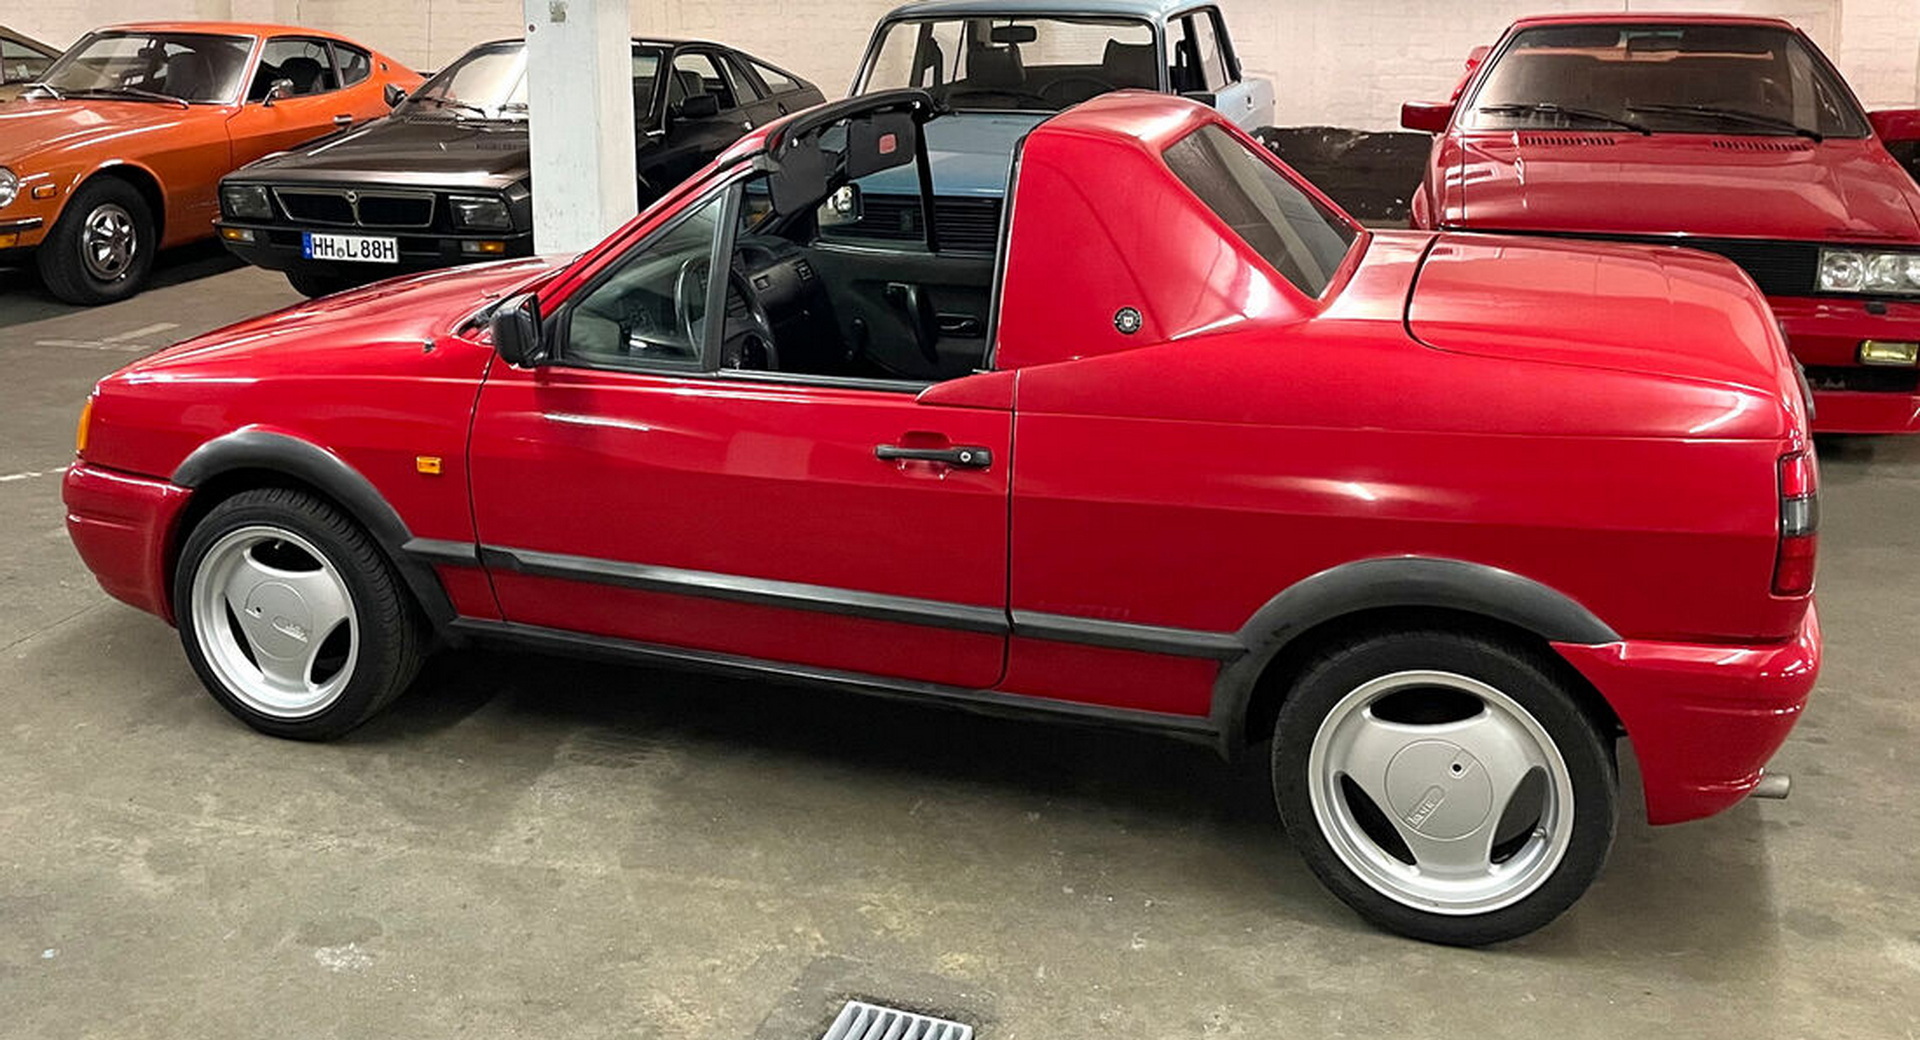 Ja Paar Onderling verbinden This Custom VW Polo Is Both A Targa And A Convertible - And It's For Sale |  Carscoops